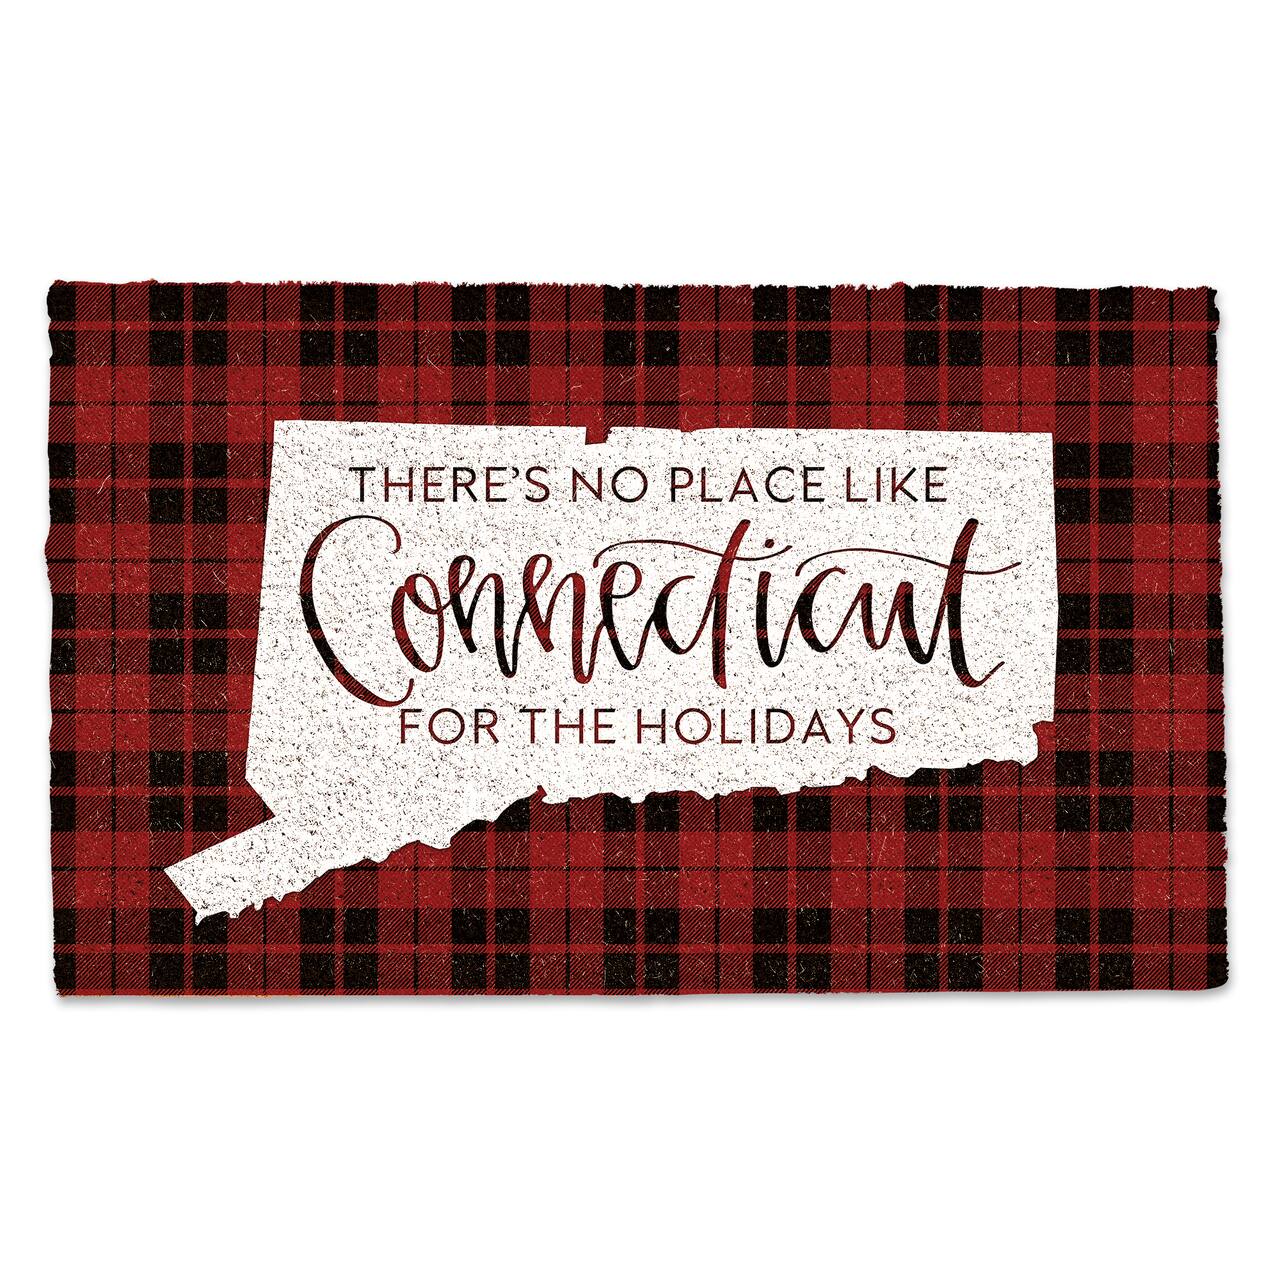 Connecticut For the Holidays Doormat